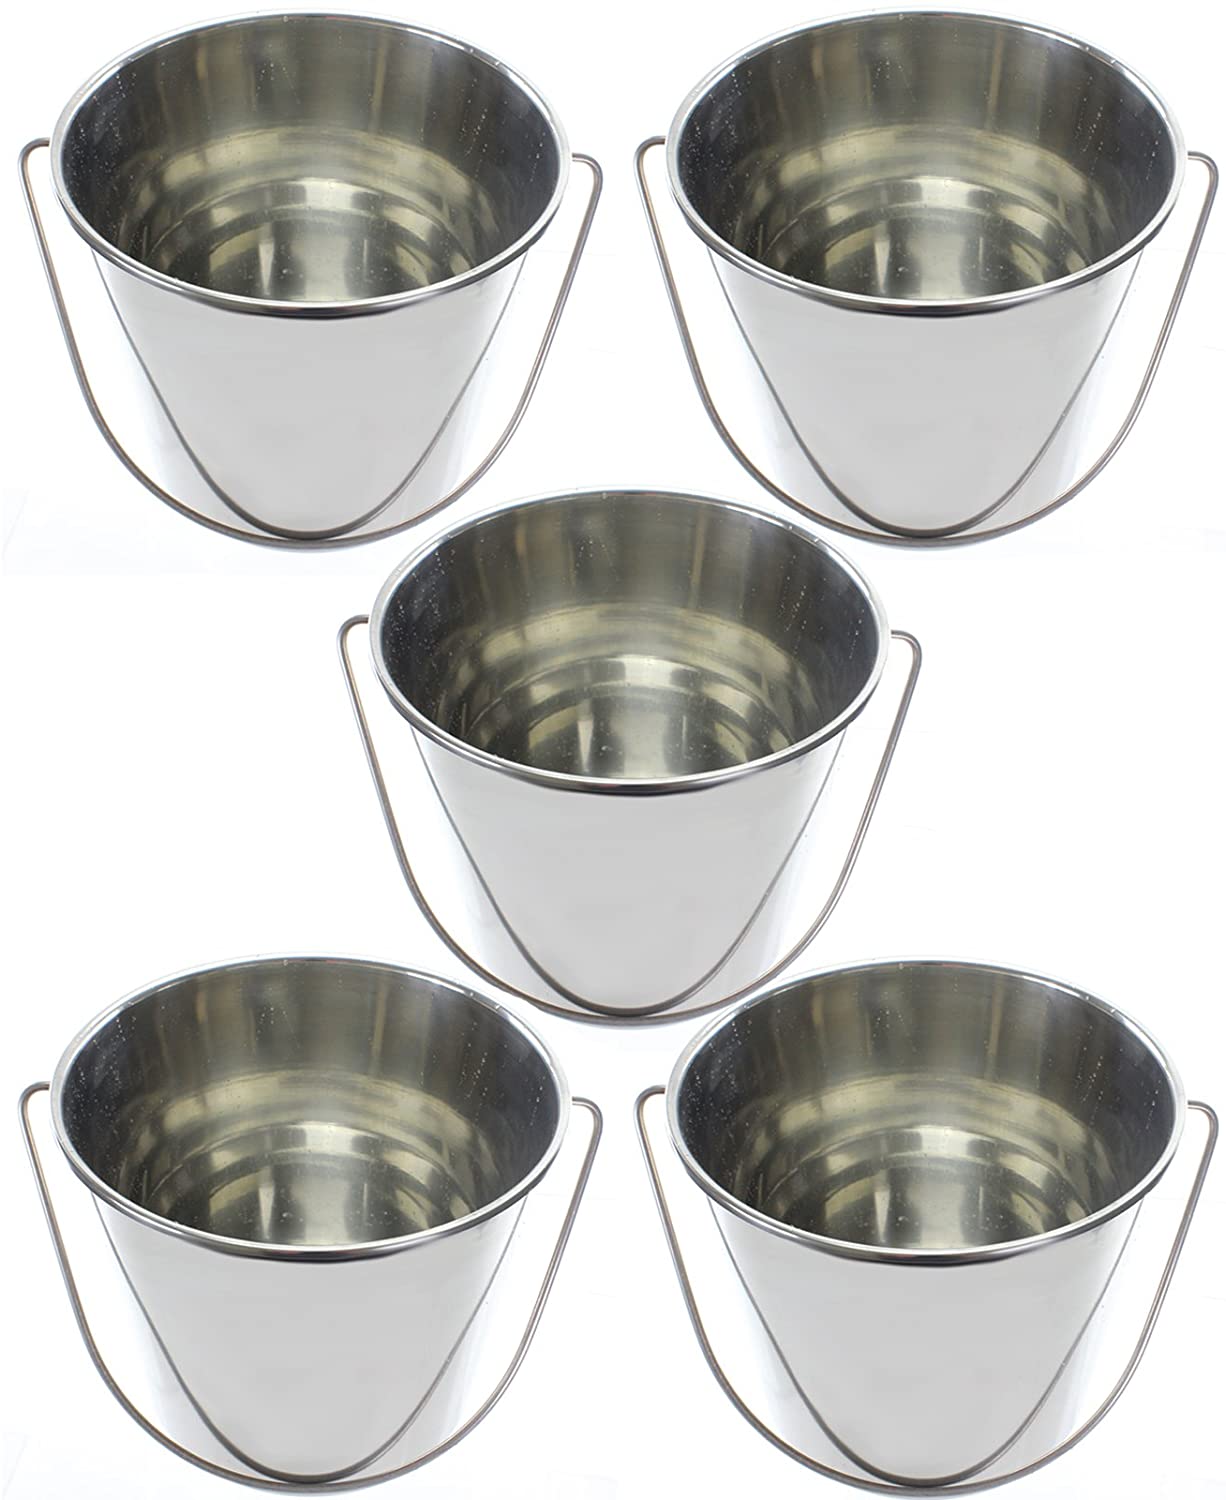 Stainless Steel Bucket, Pack of 5 Buckets